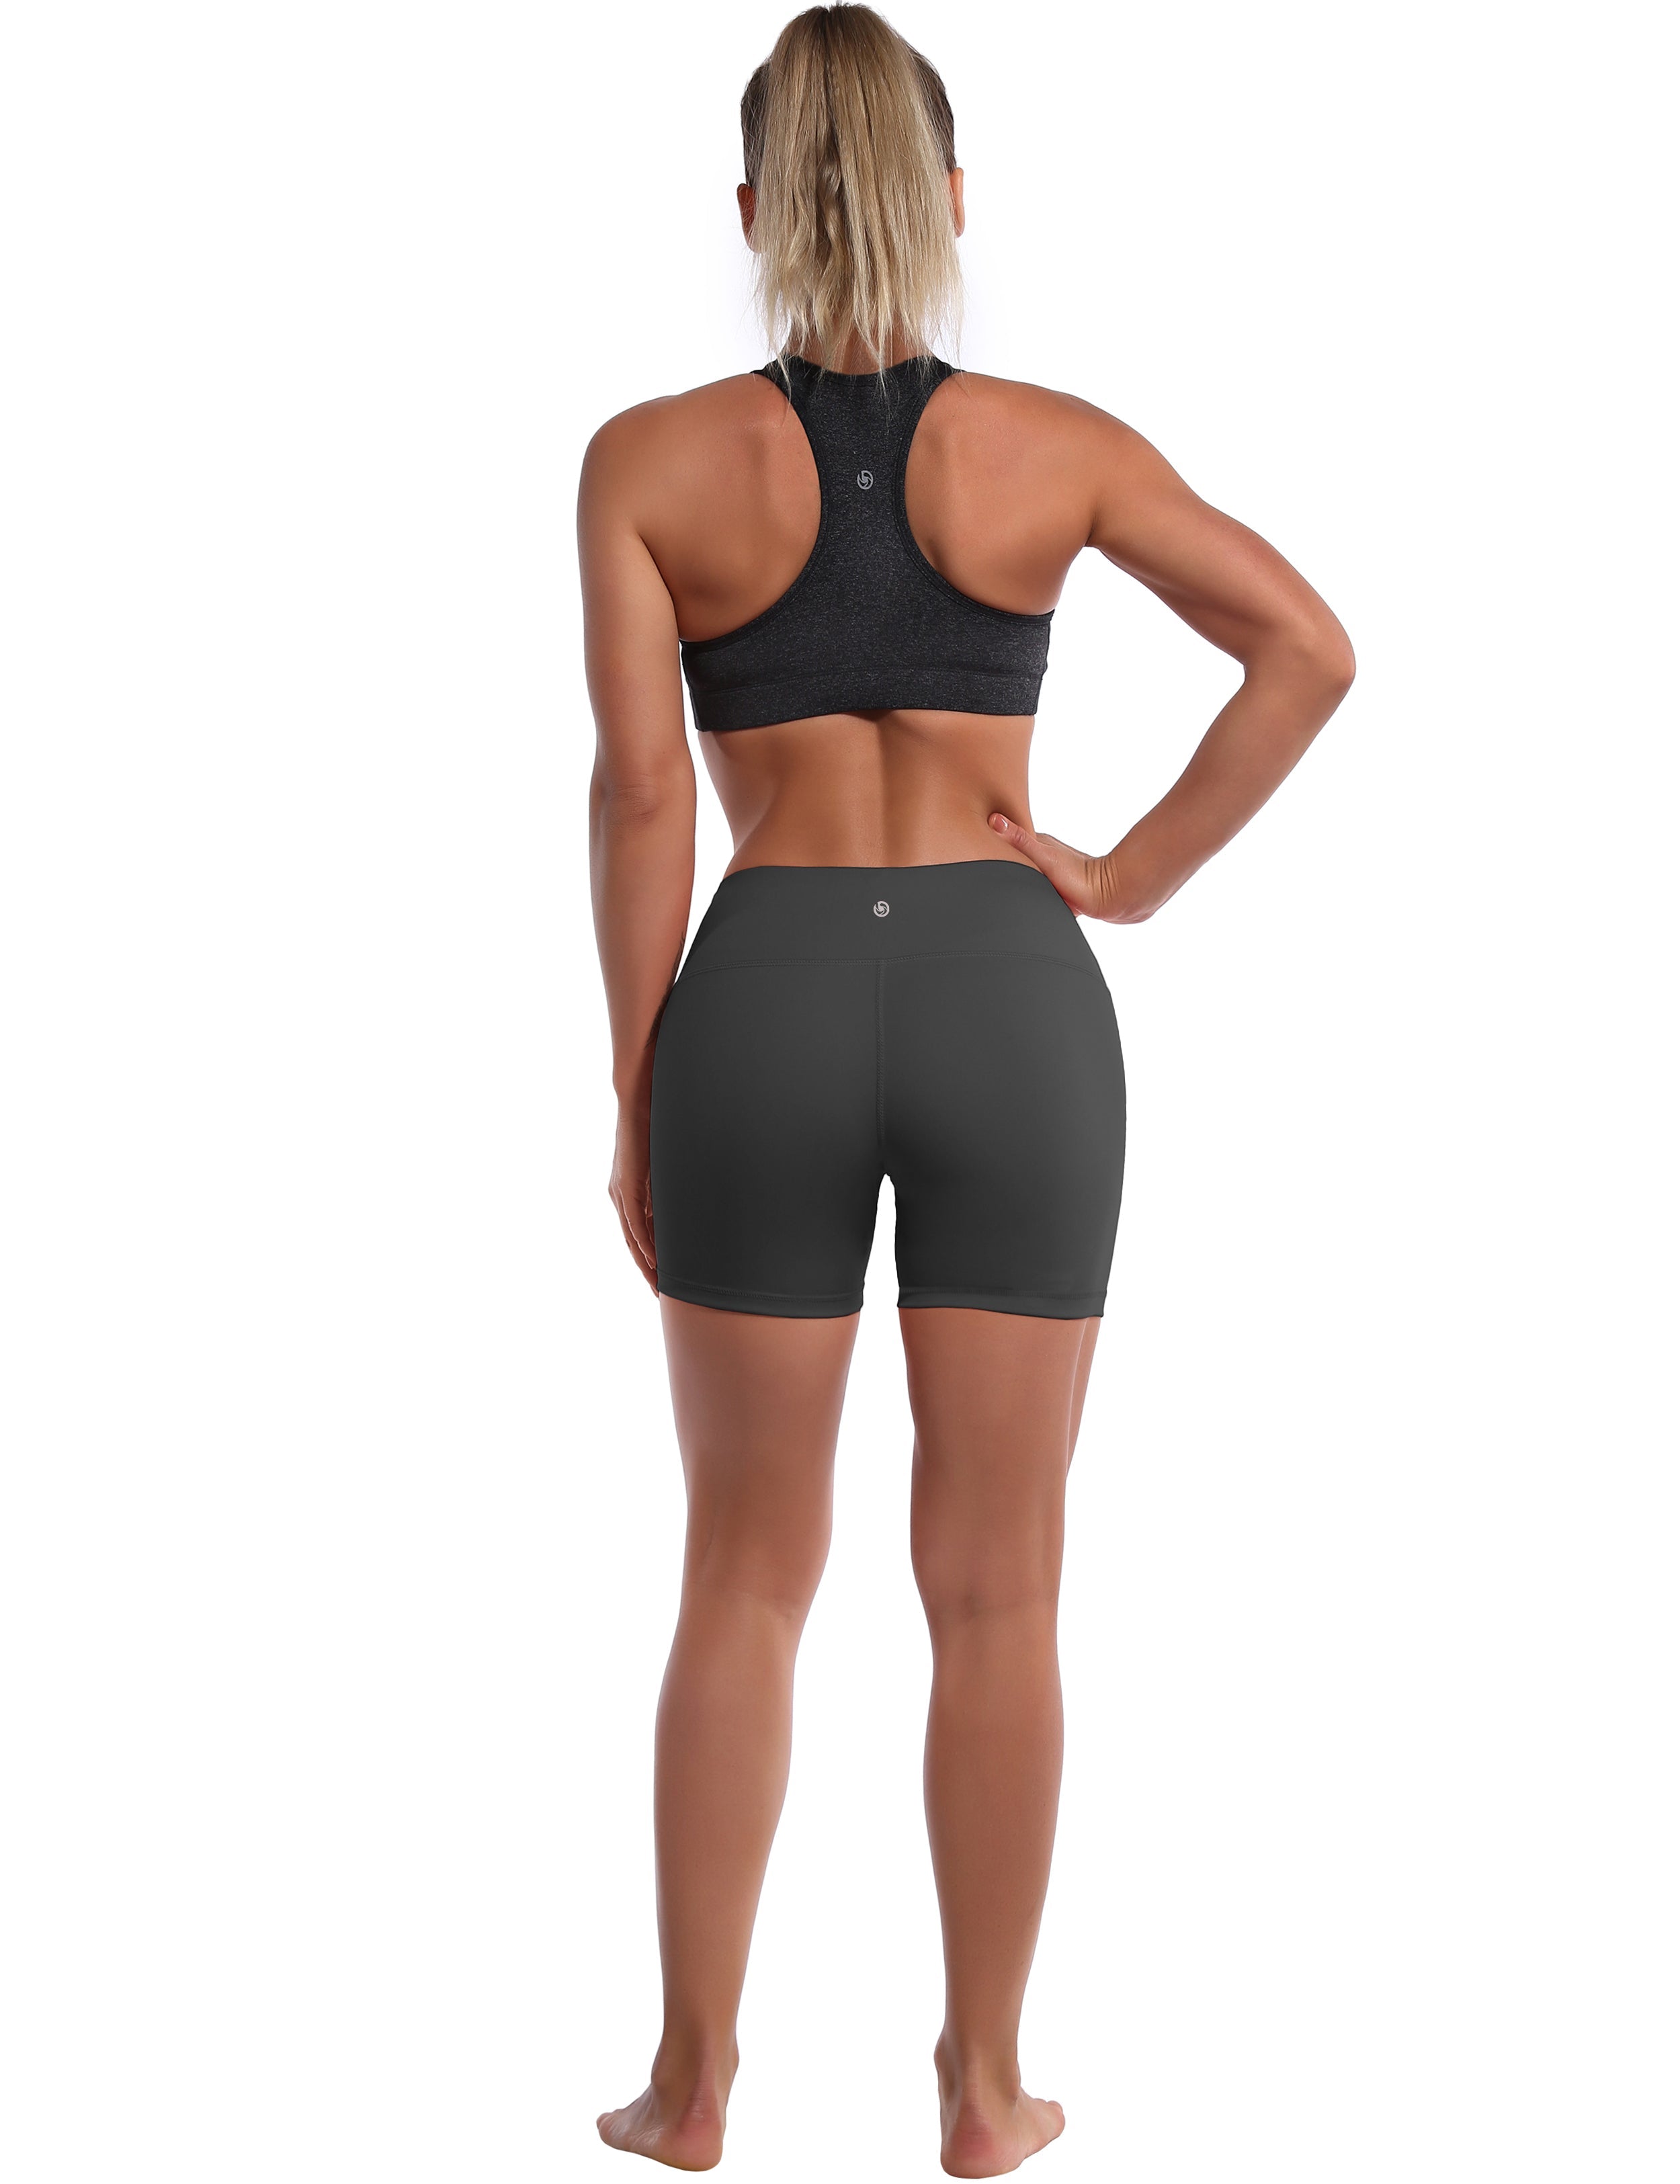 4" Biking Shorts shadowcharcoal Sleek, soft, smooth and totally comfortable: our newest style is here. Softest-ever fabric High elasticity High density 4-way stretch Fabric doesn't attract lint easily No see-through Moisture-wicking Machine wash 75% Nylon, 25% Spandex